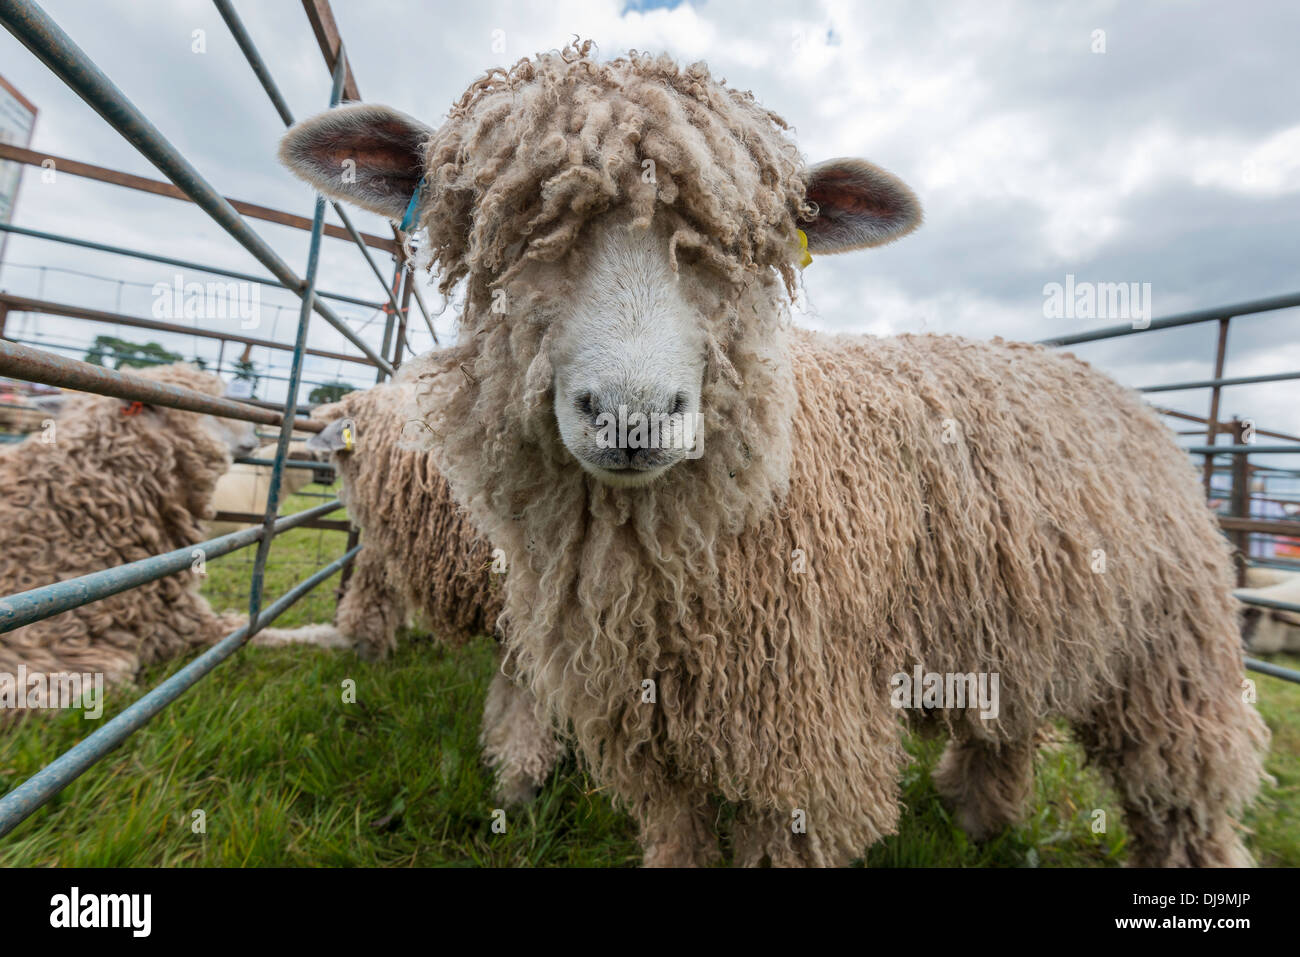 LINCOLN LONGWOOL SHEEP IN PEN AT AGRICULTURAL SHOW CHEPSTOW WALES UK Stock Photo